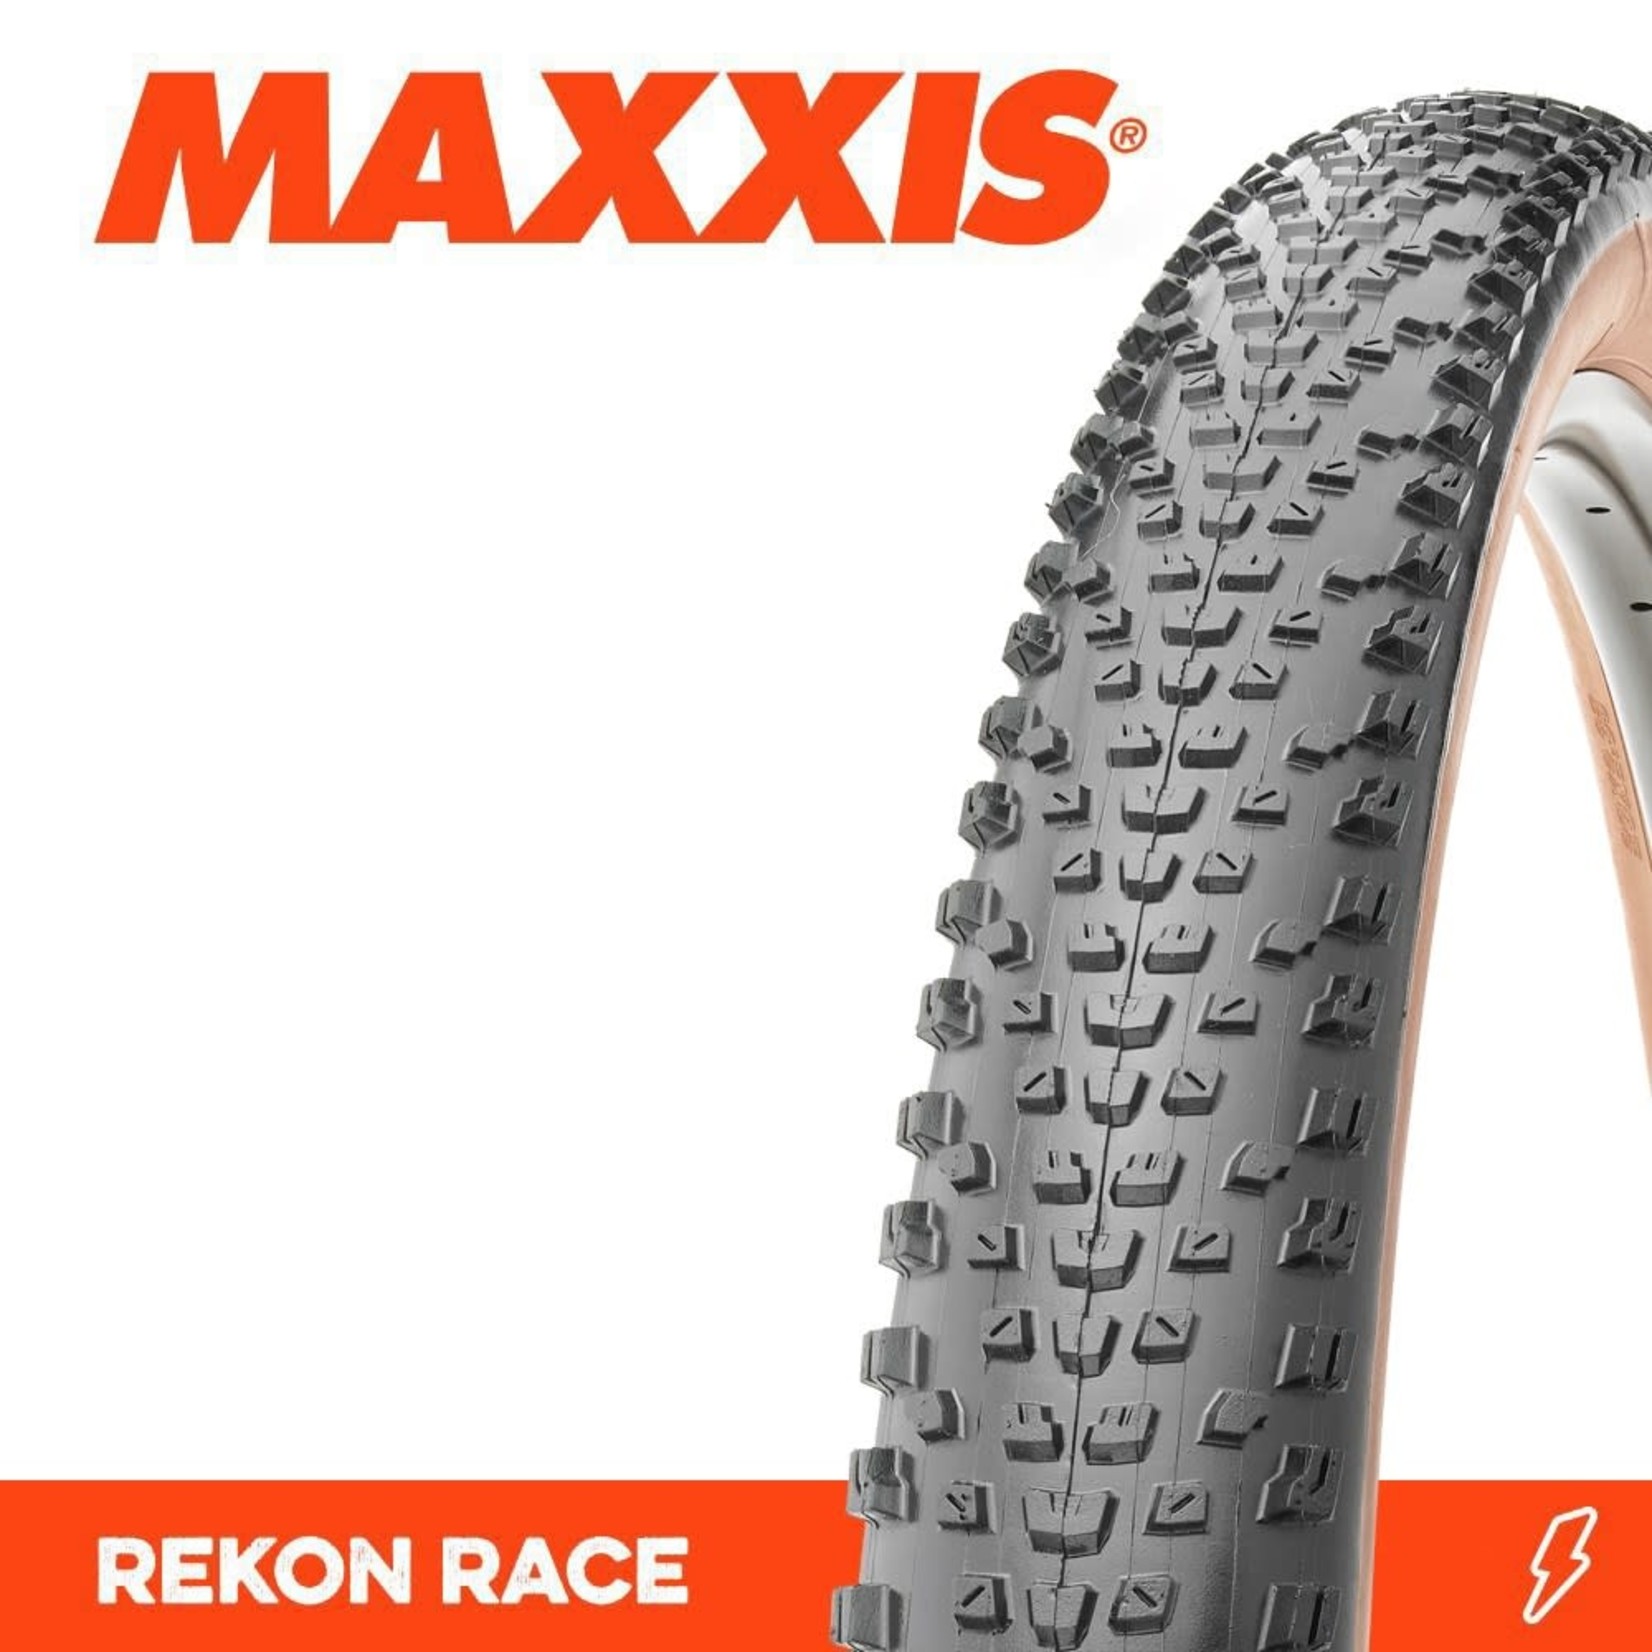 Maxxis Maxxis Reckon Race Bike Tyre - 29 X 2.40 - Tanwall Wire Bead 60TPI - Pair